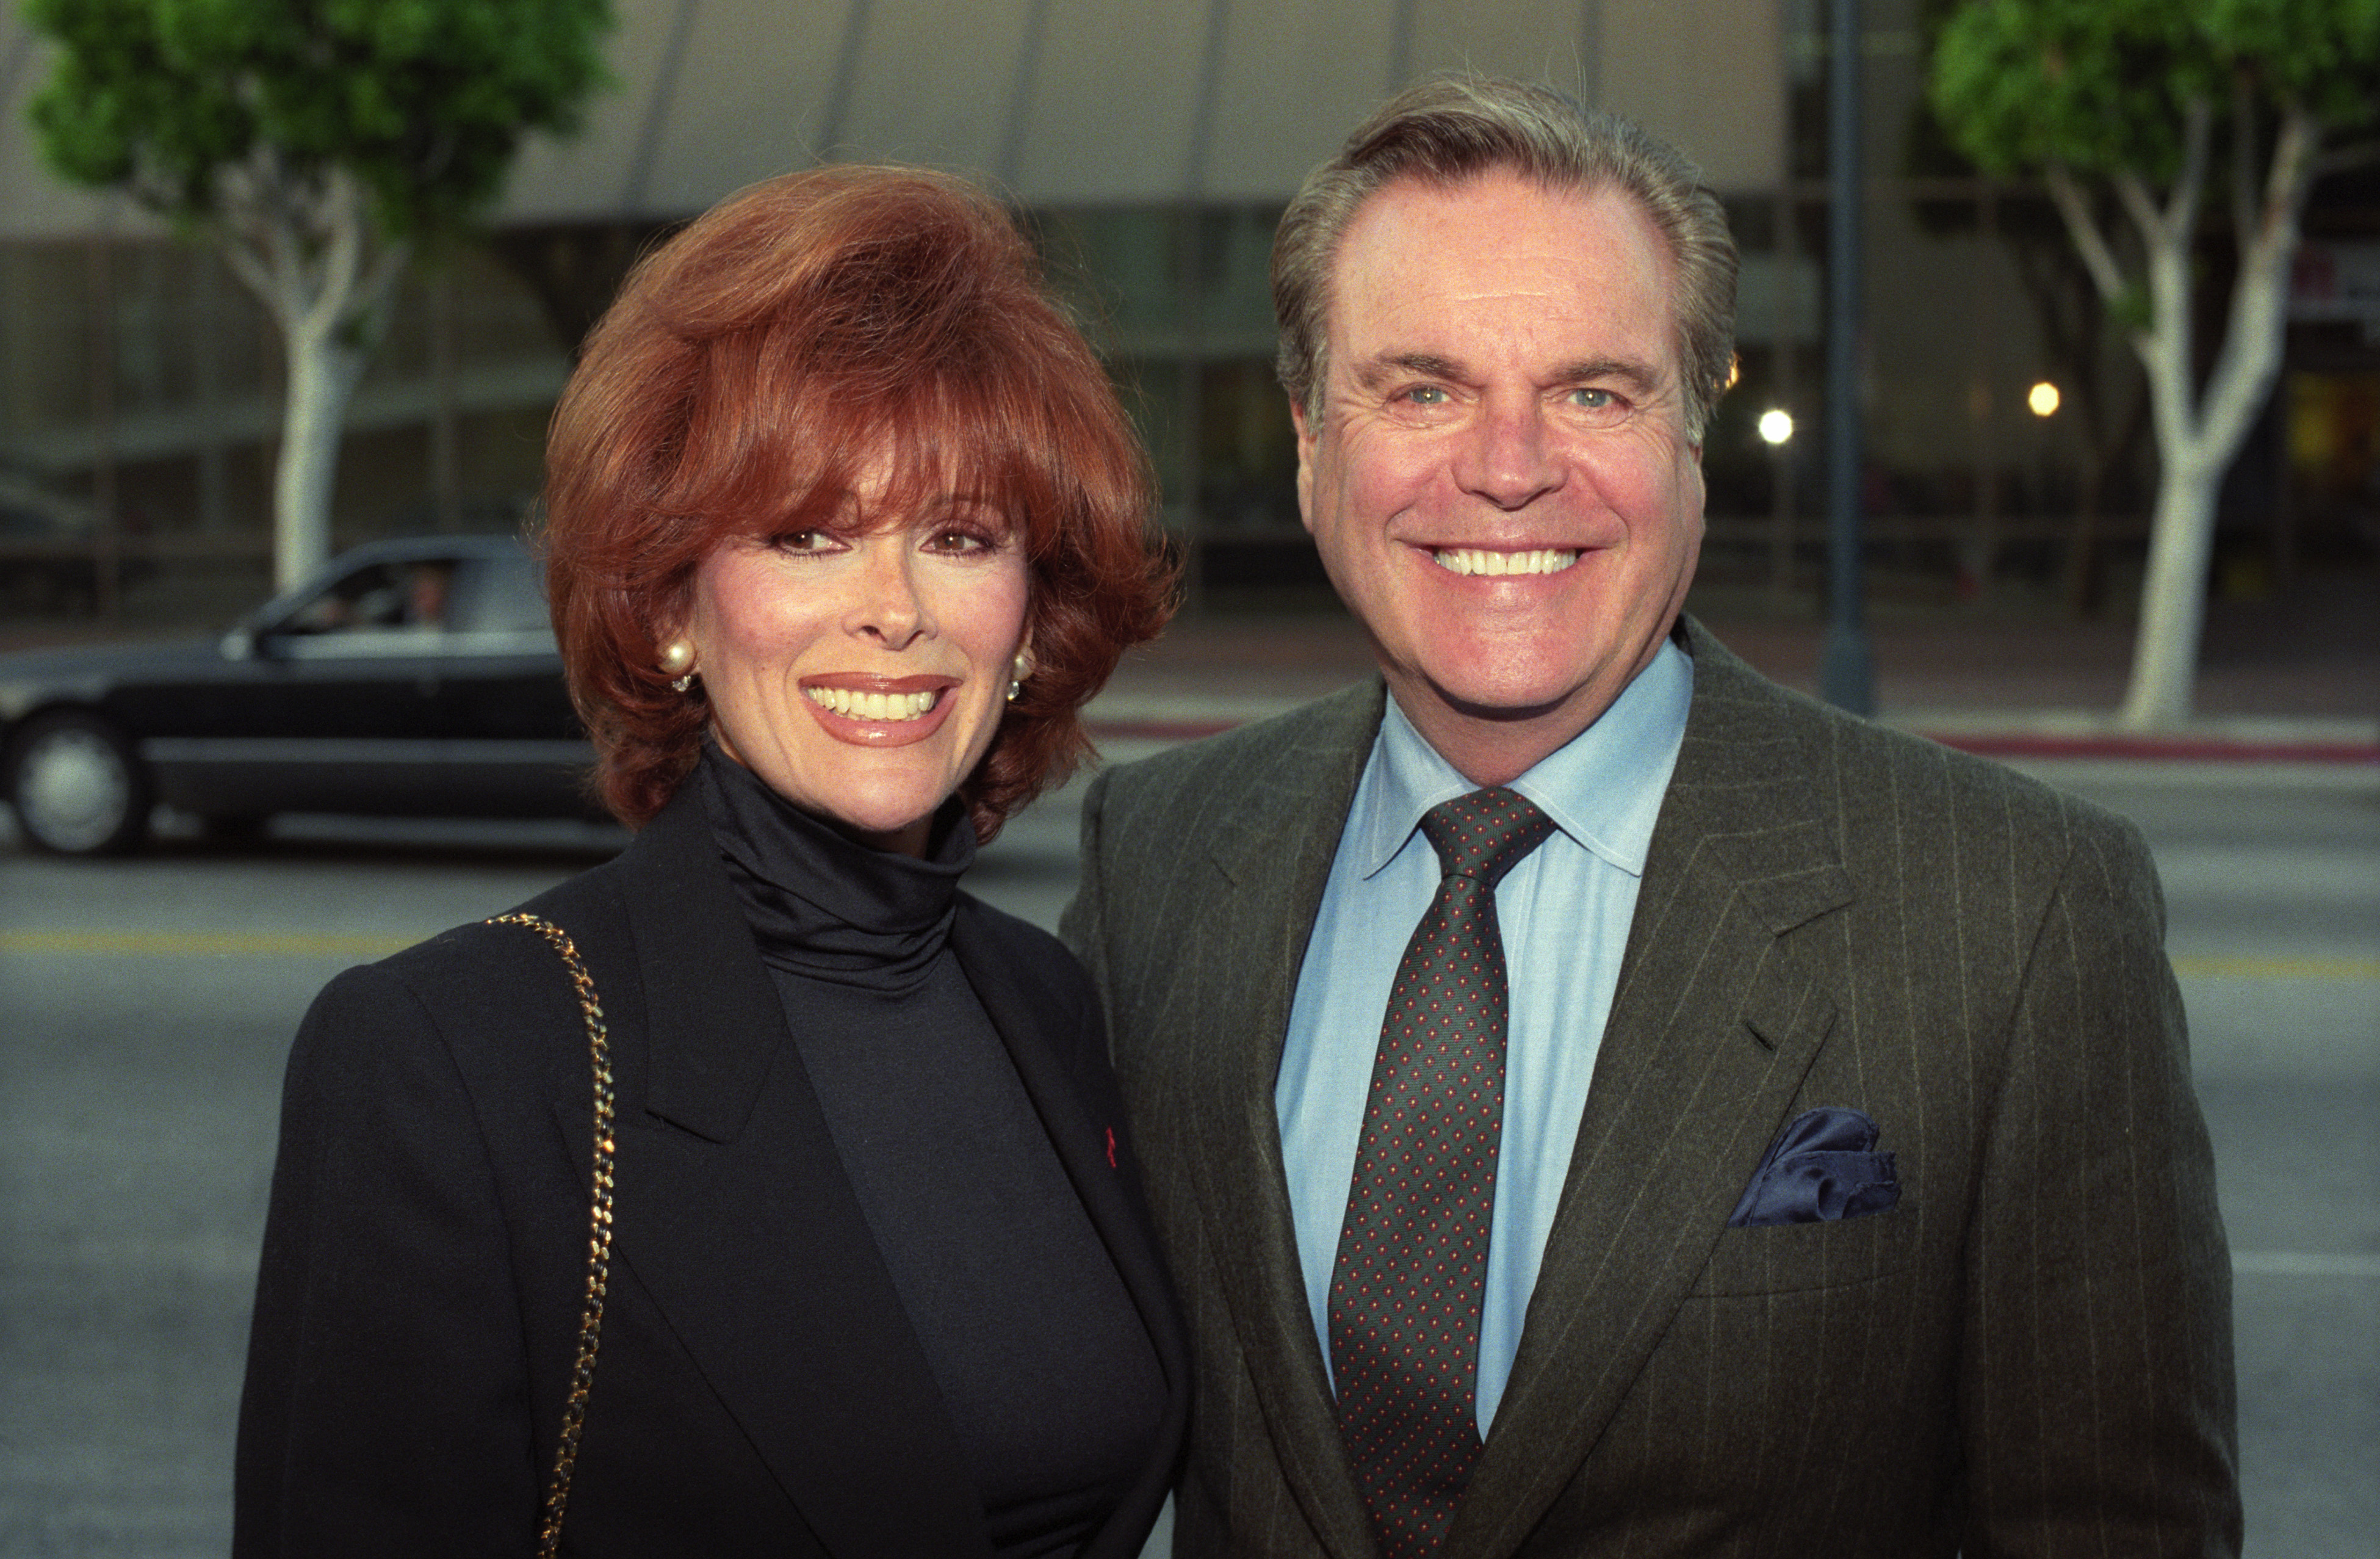 Jill St. John and Robert Wagner pose for a portrait in 1997 in Los Angeles, California | Source: Getty Images